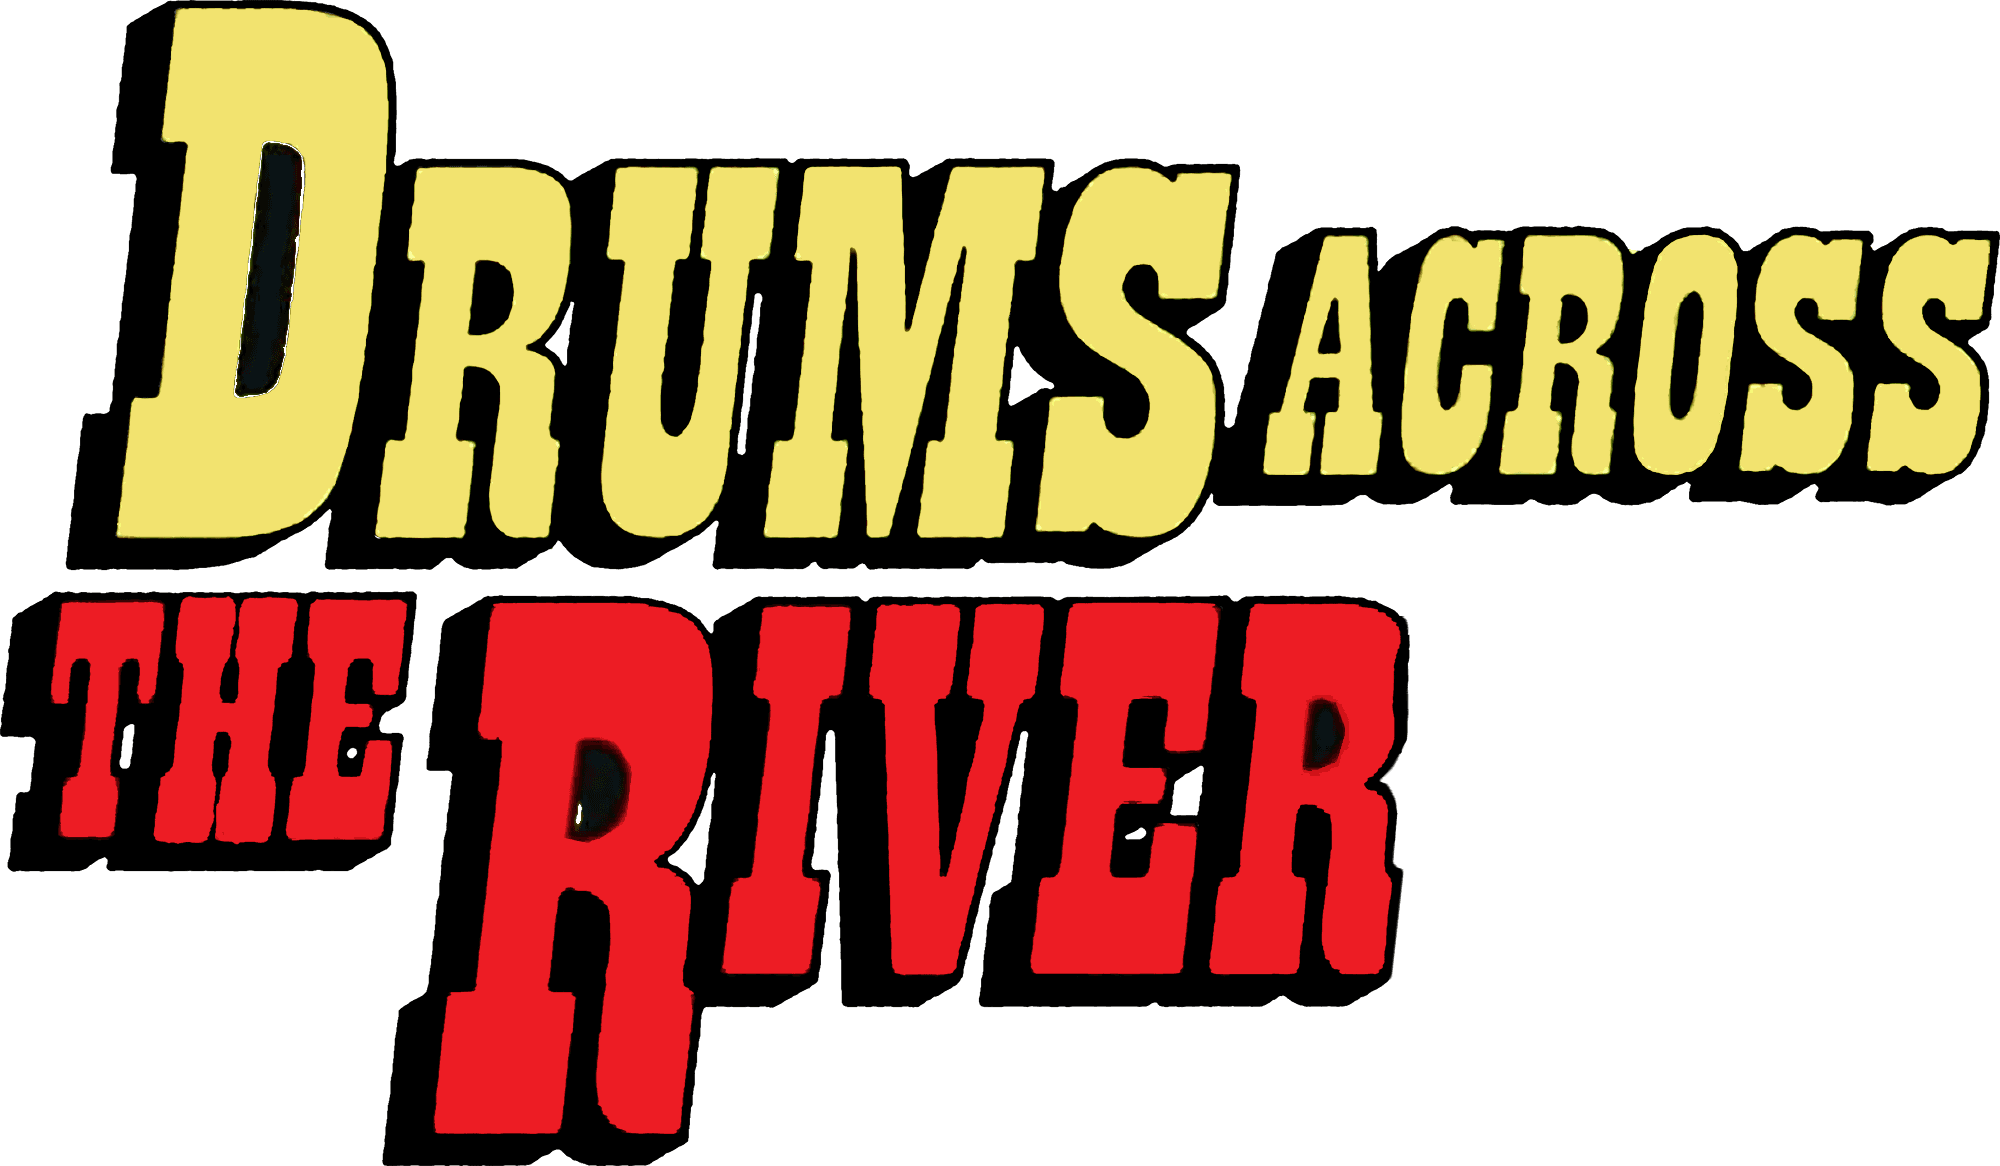 Drums Across the River logo